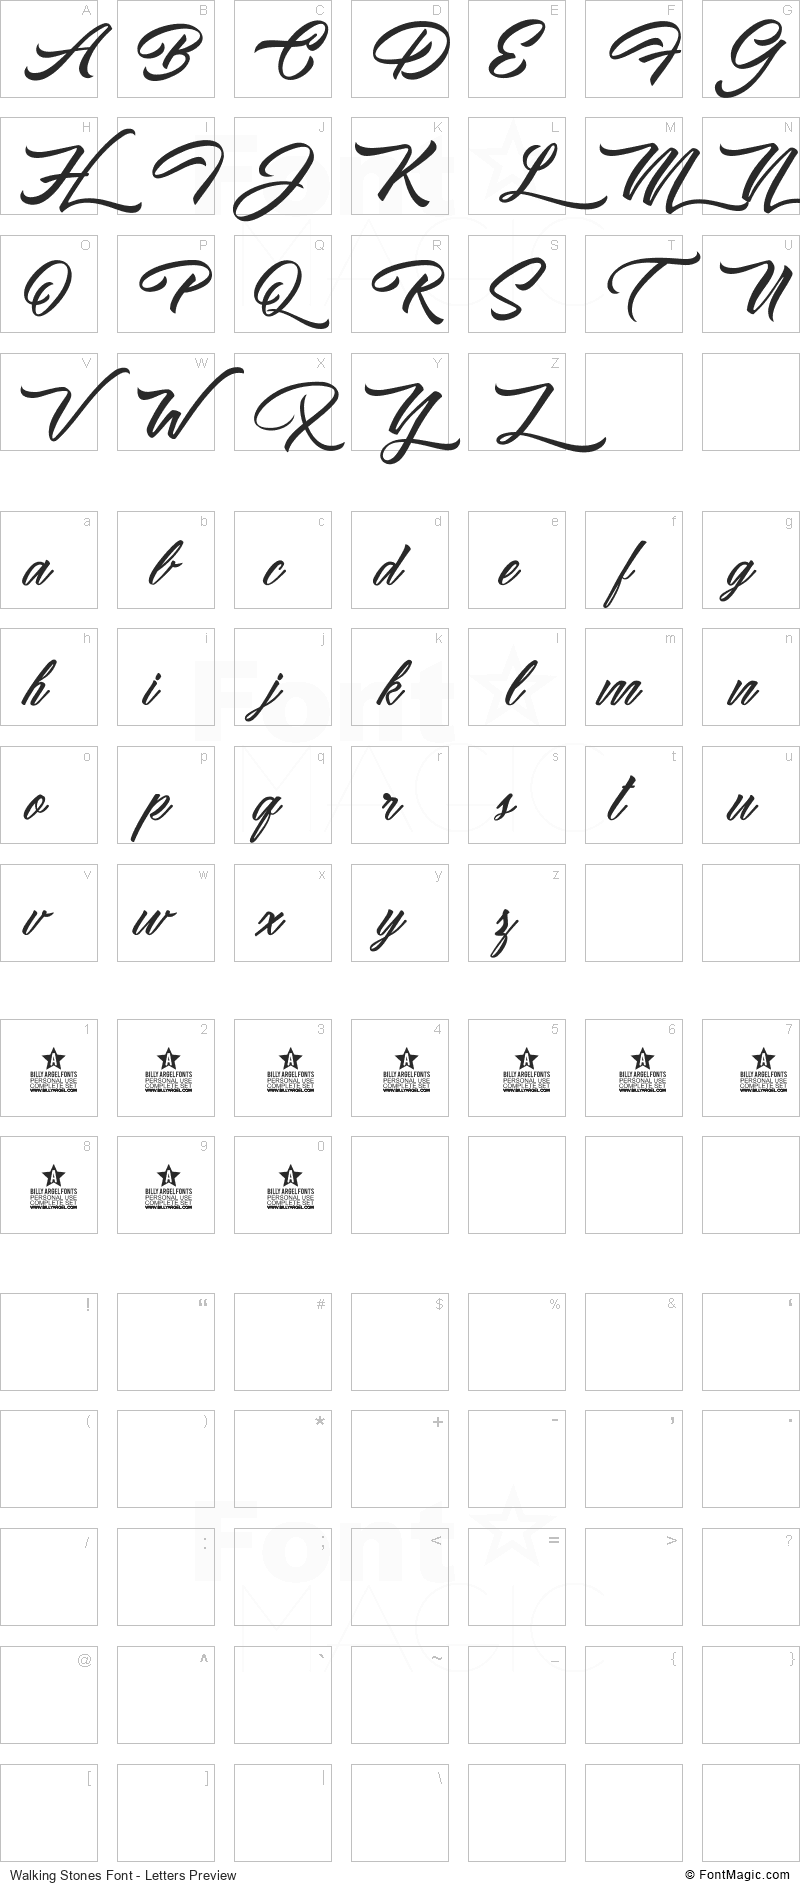 Walking Stones Font - All Latters Preview Chart